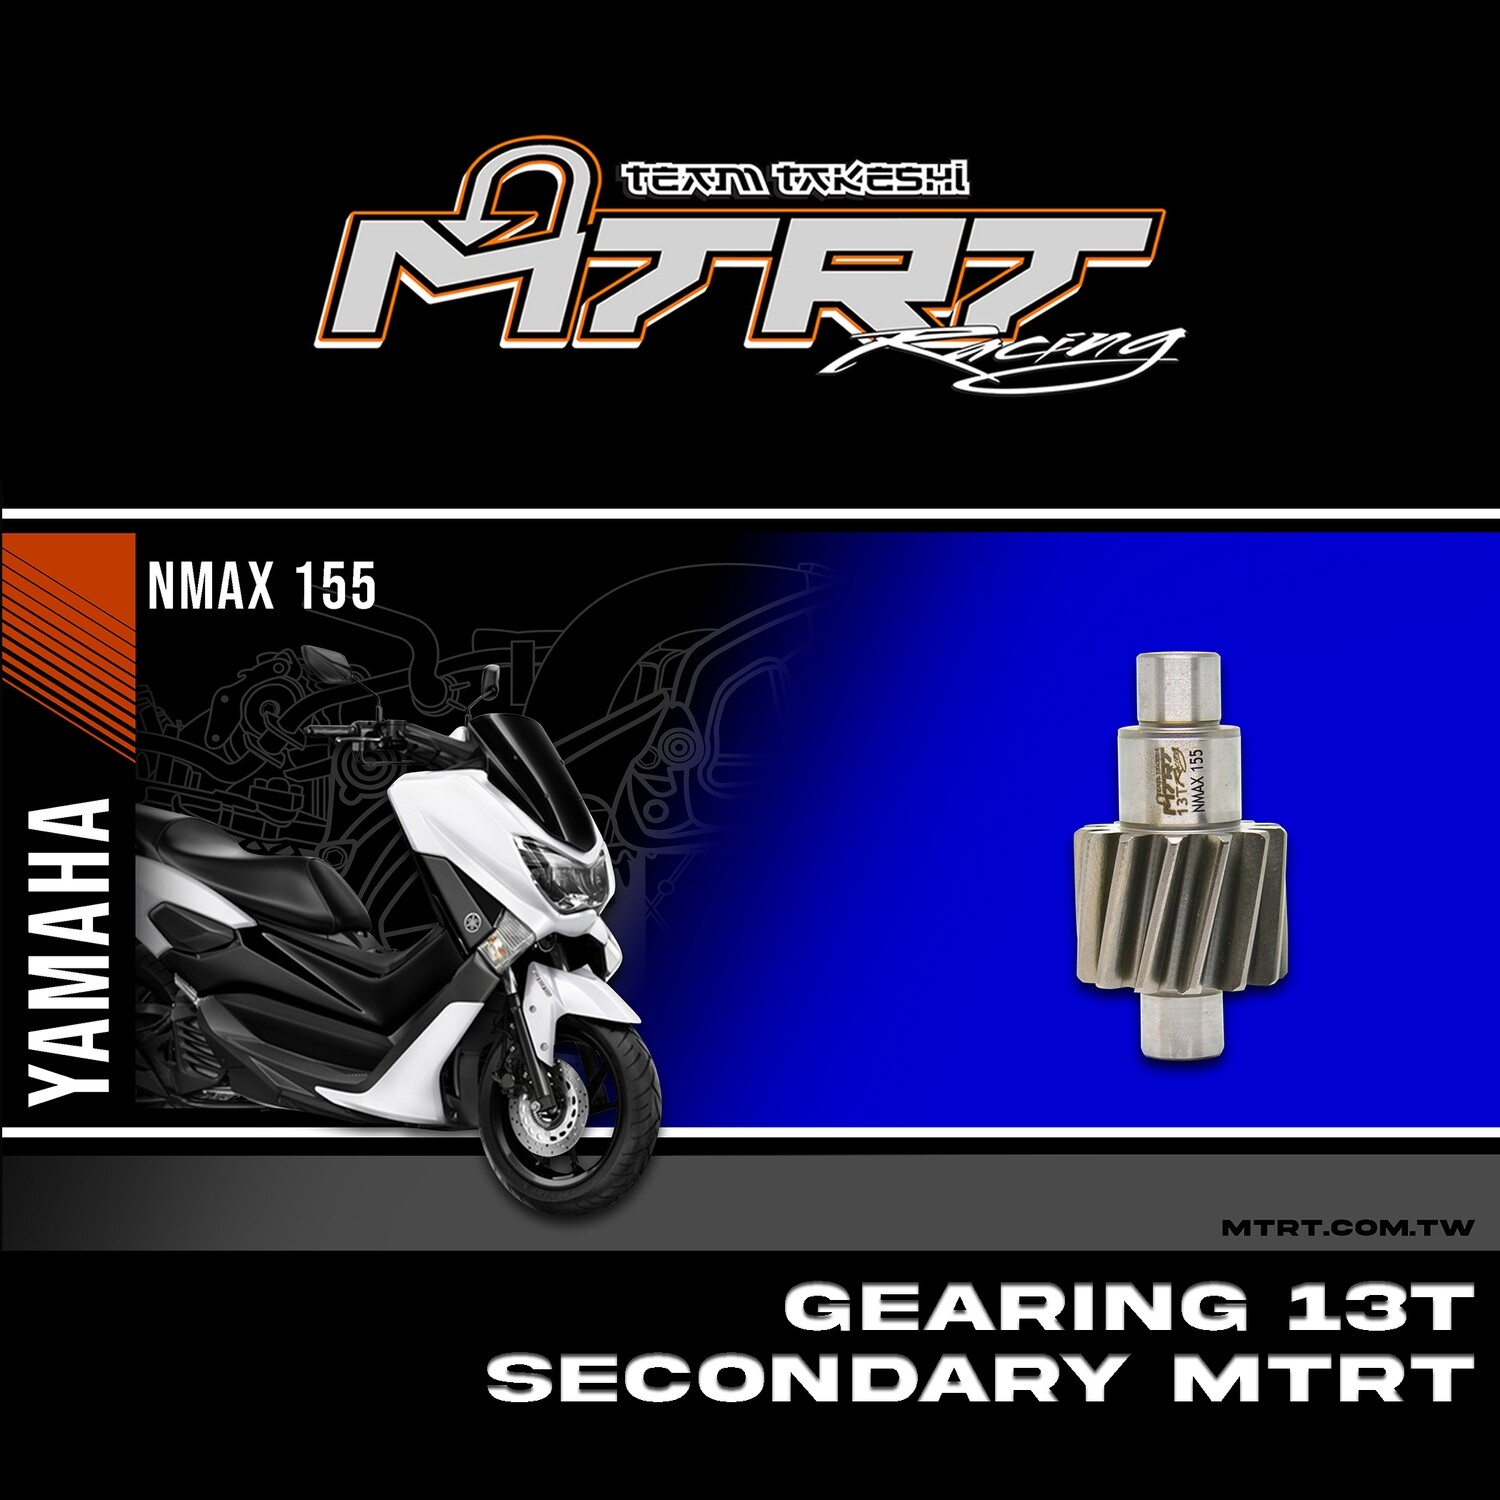 GEARING 13T secondary NMAX